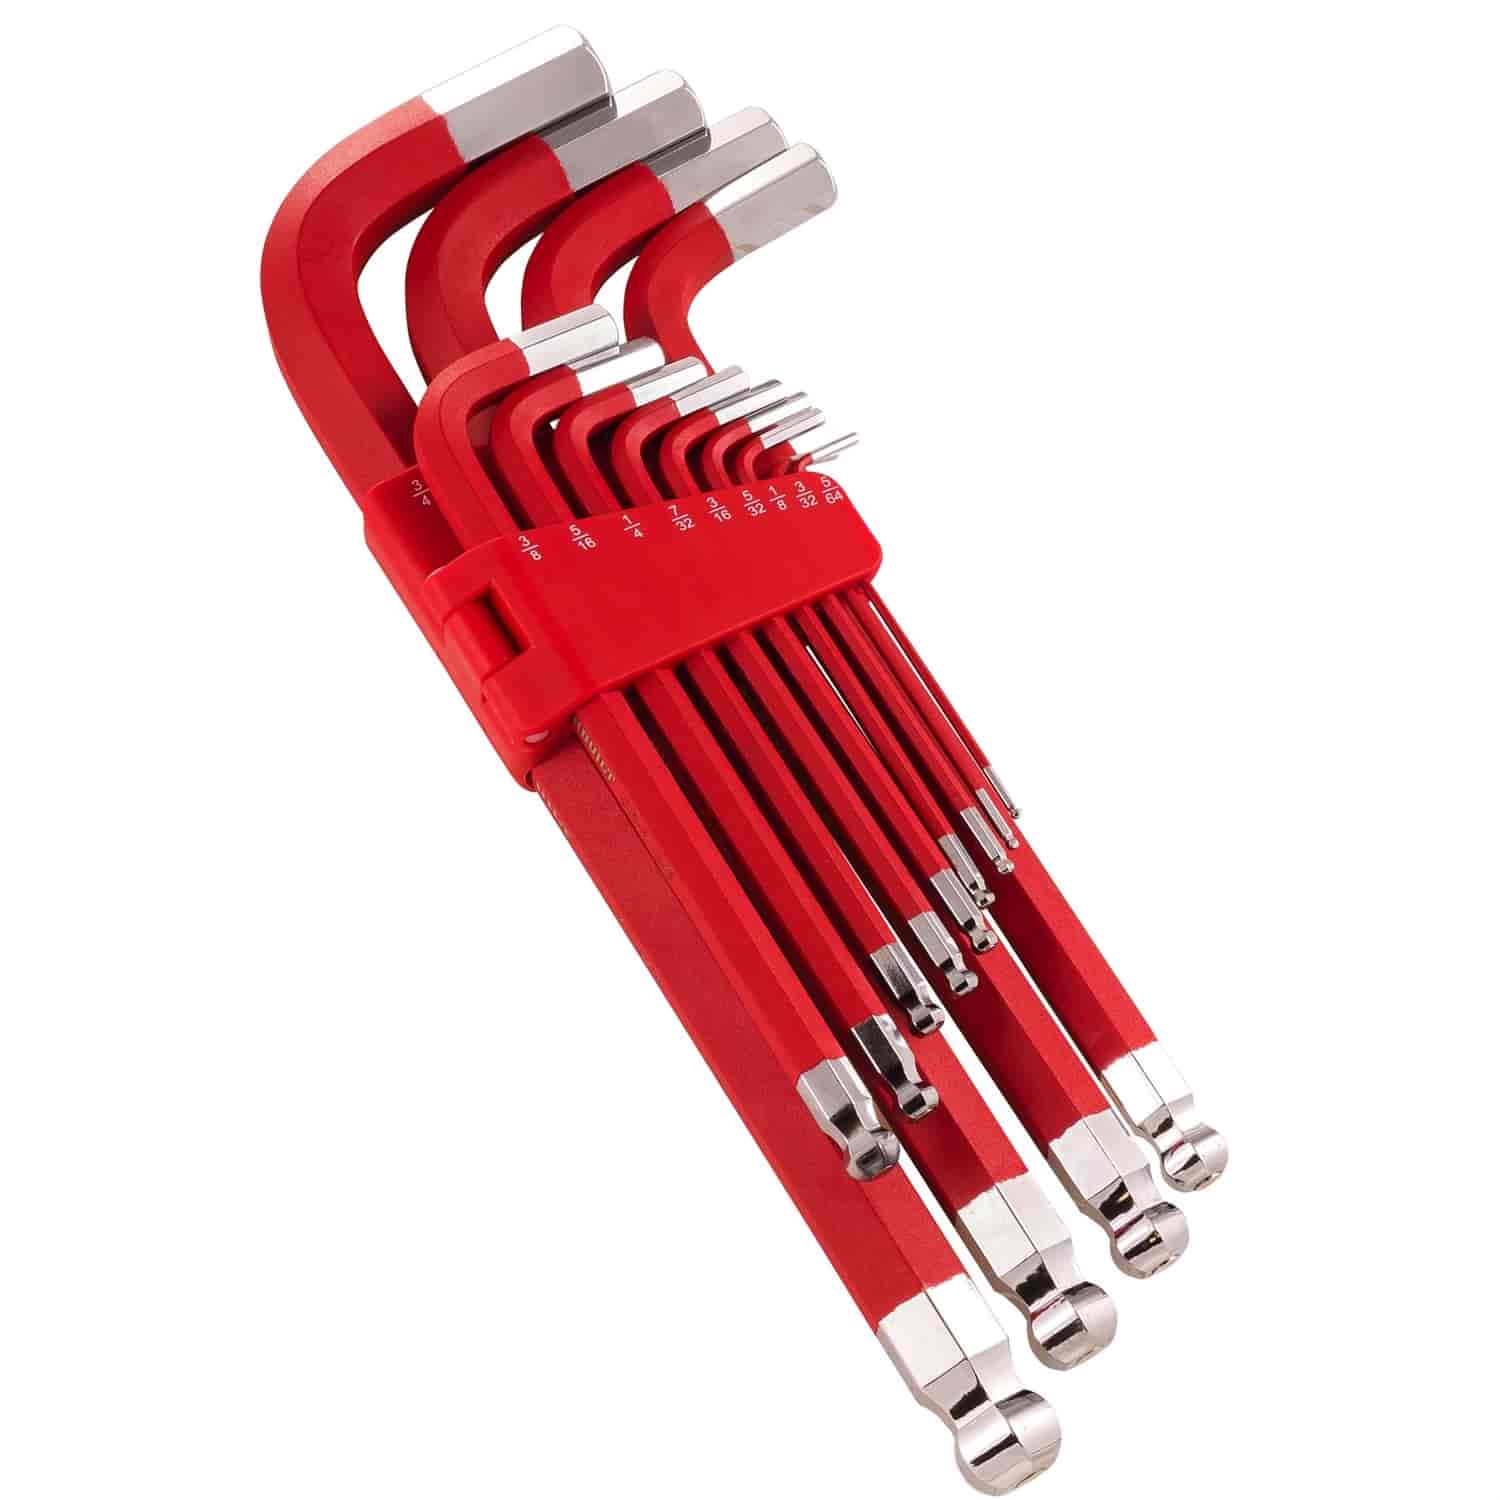 13PC SAE HEX KEY WRENCH